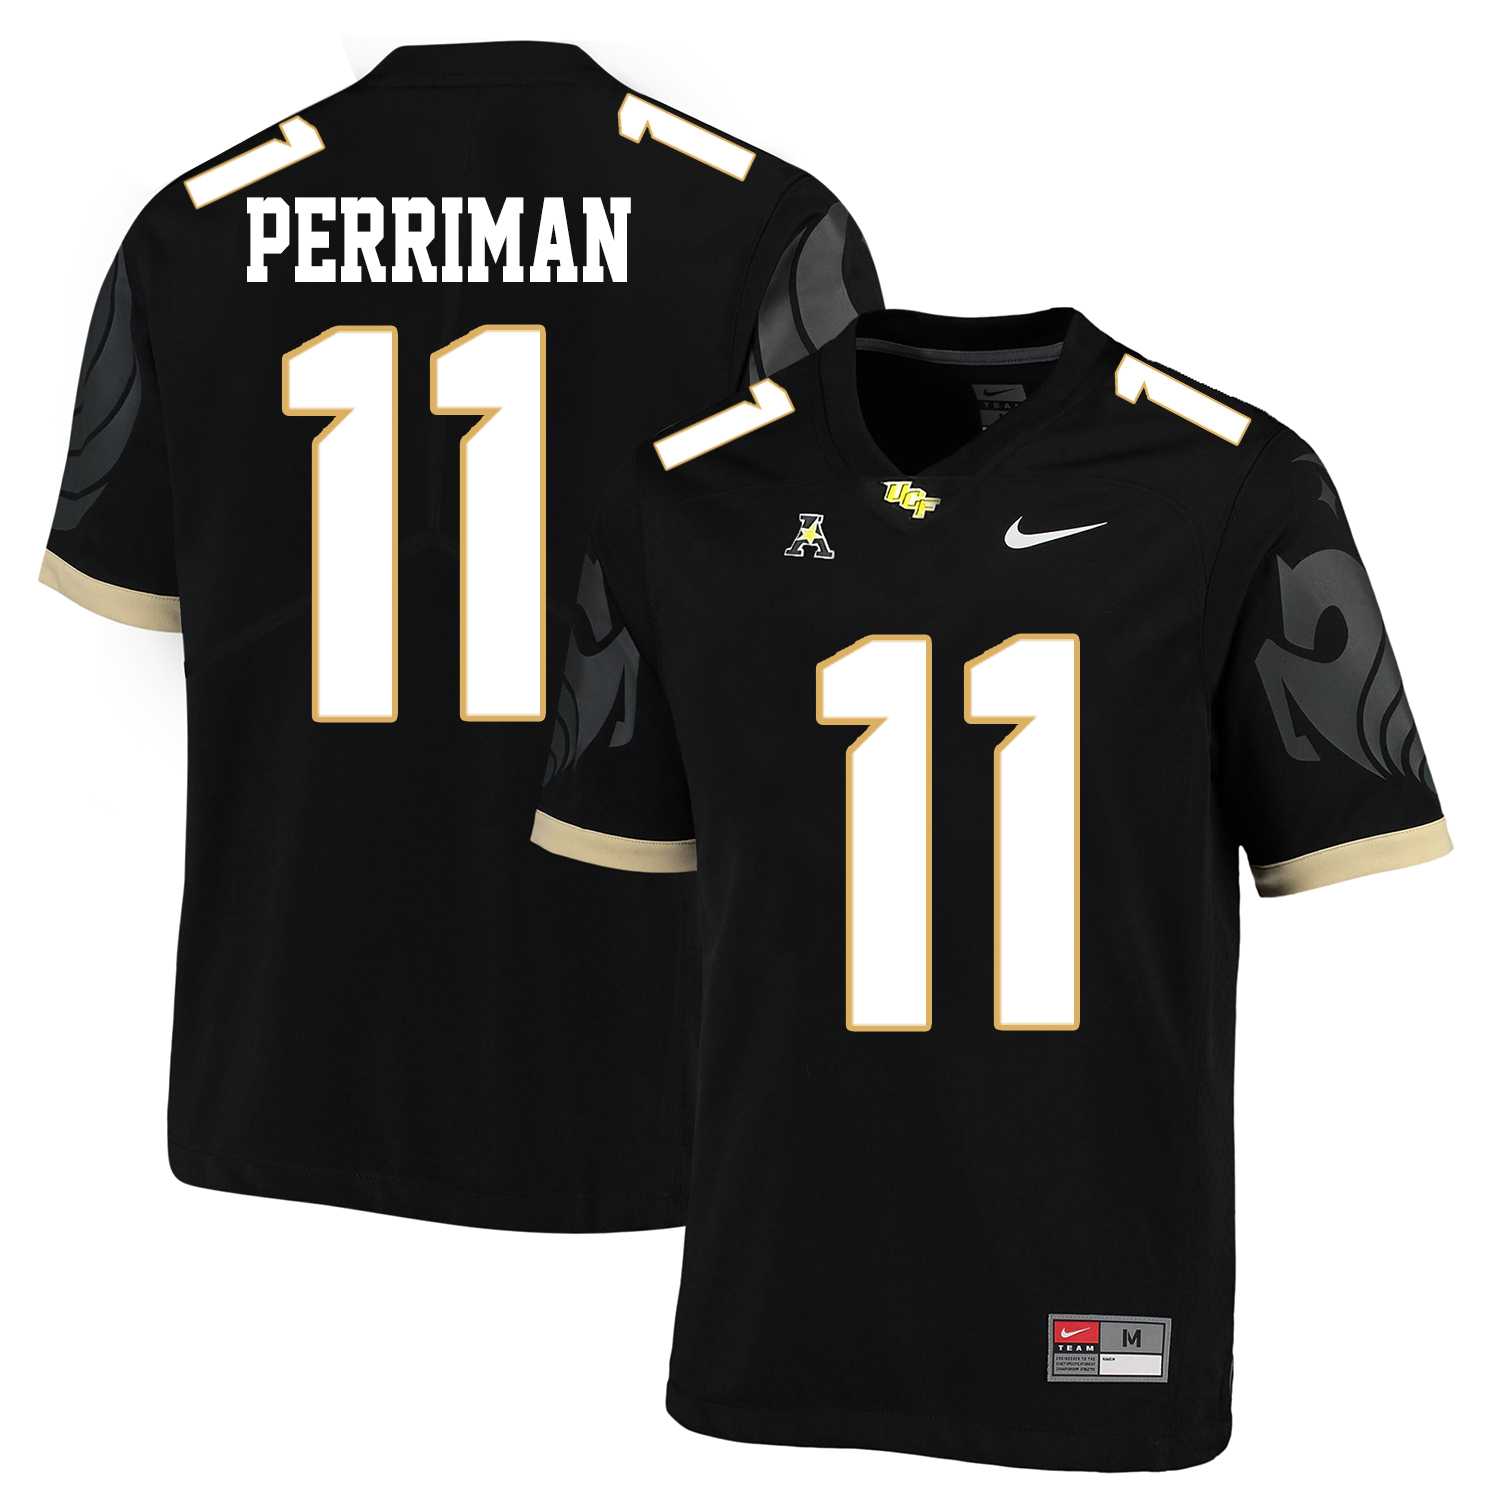 UCF Knights 11 Breshad Perriman Black College Football Jersey DingZhi